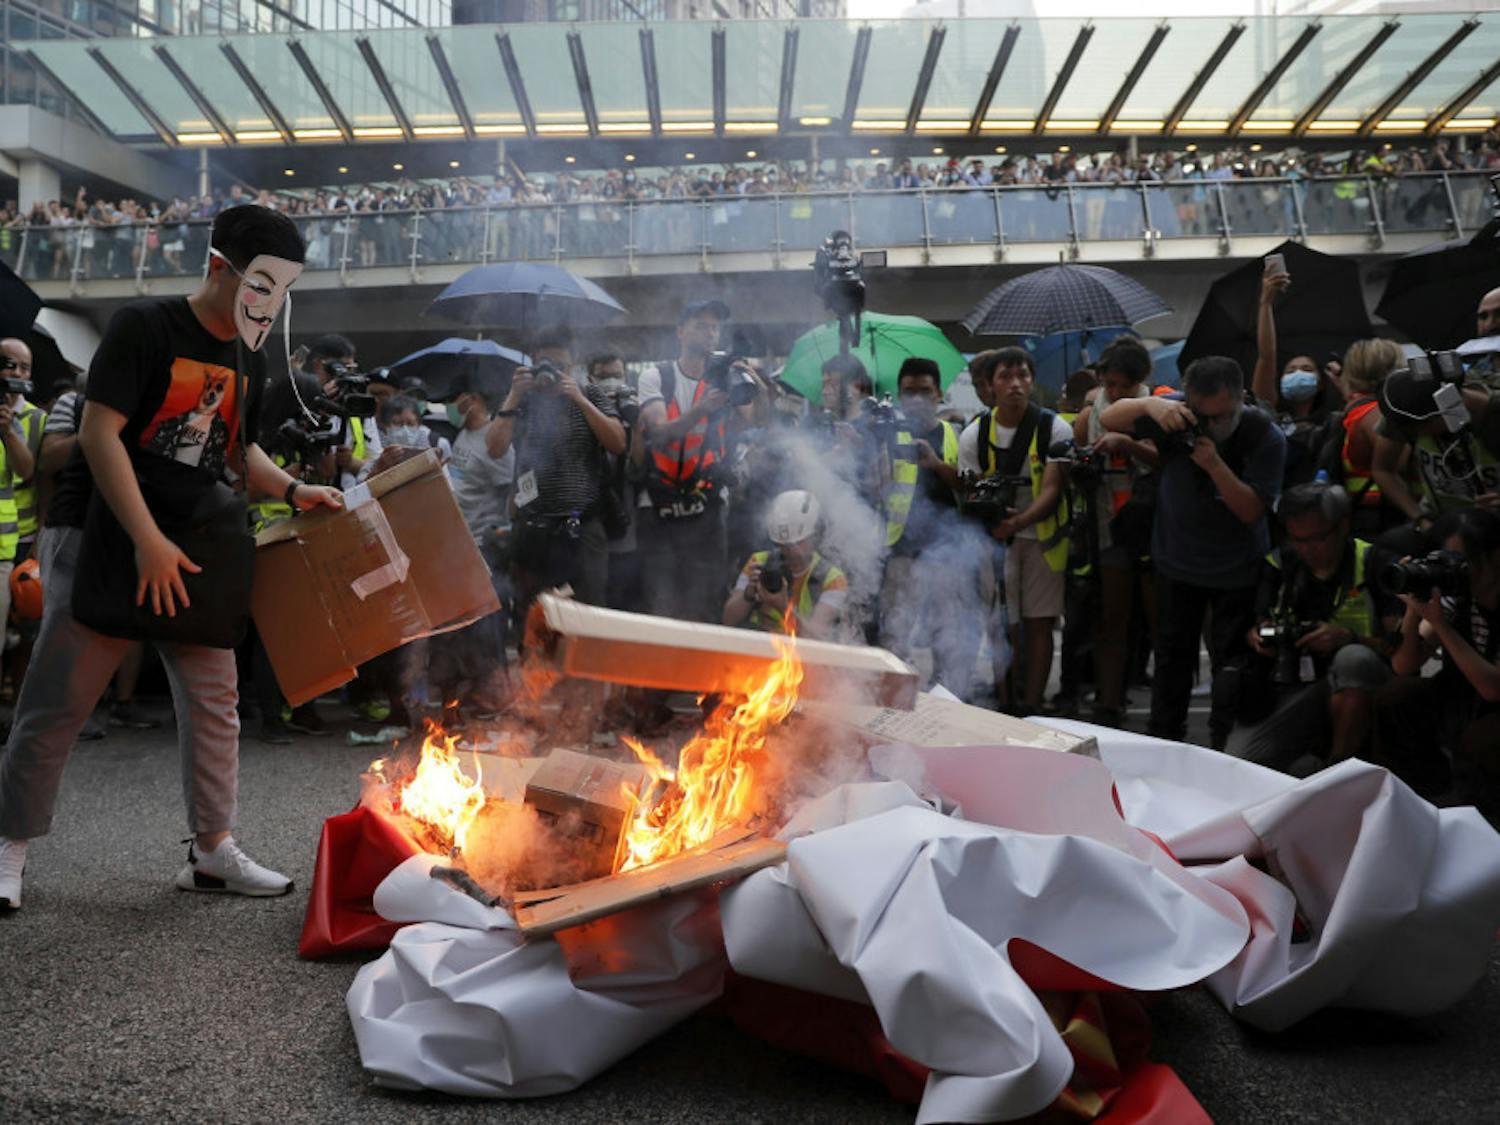 A masked protester sets fire to a China 70th anniversary celebration banner in Hong Kong, Friday, Oct. 4, 2019. Hong Kong Chief Executive Carrie Lam announced that protesters are banned from wearing masks to conceal their identities in a hardening of the government's stance against the 4-month-old demonstrations. (AP Photo/Kin Cheung)